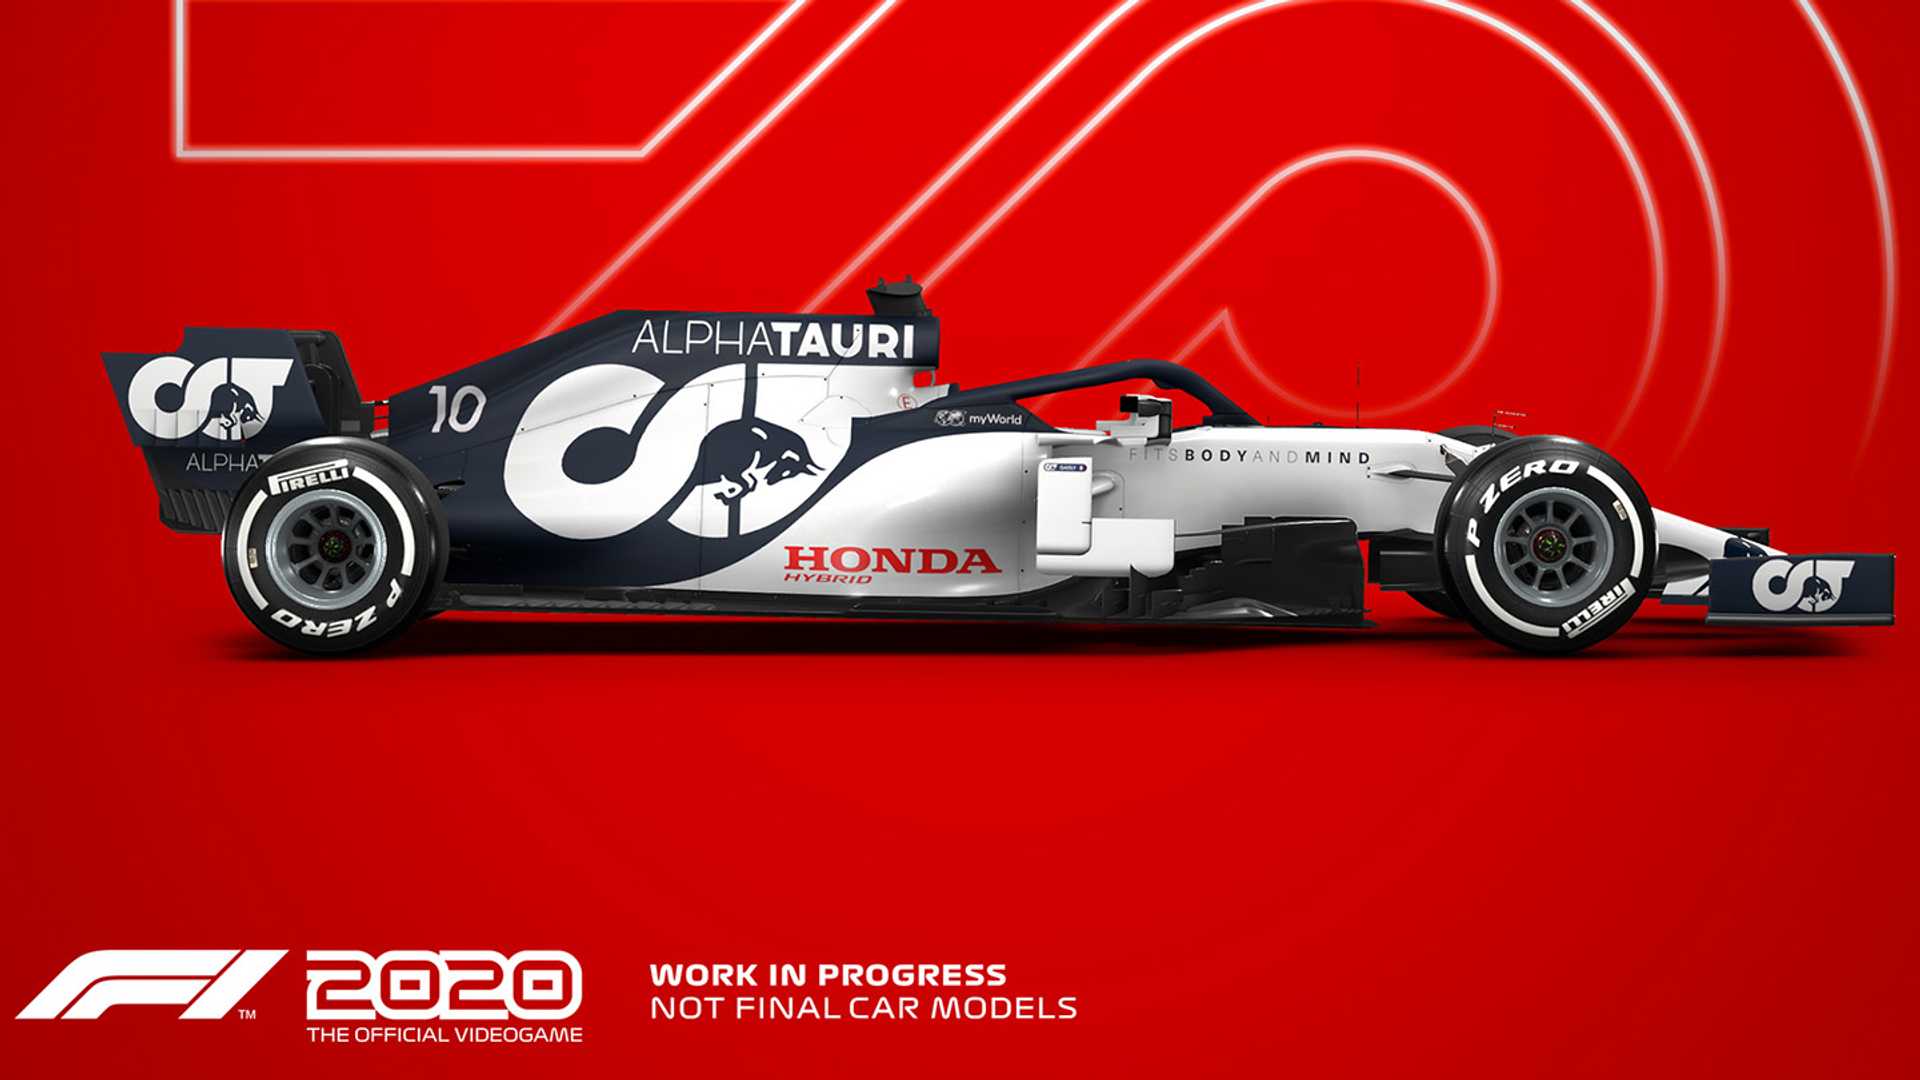 F1 2020 video game preview with 2020 Alpha Tauri. Motor1.com Photo